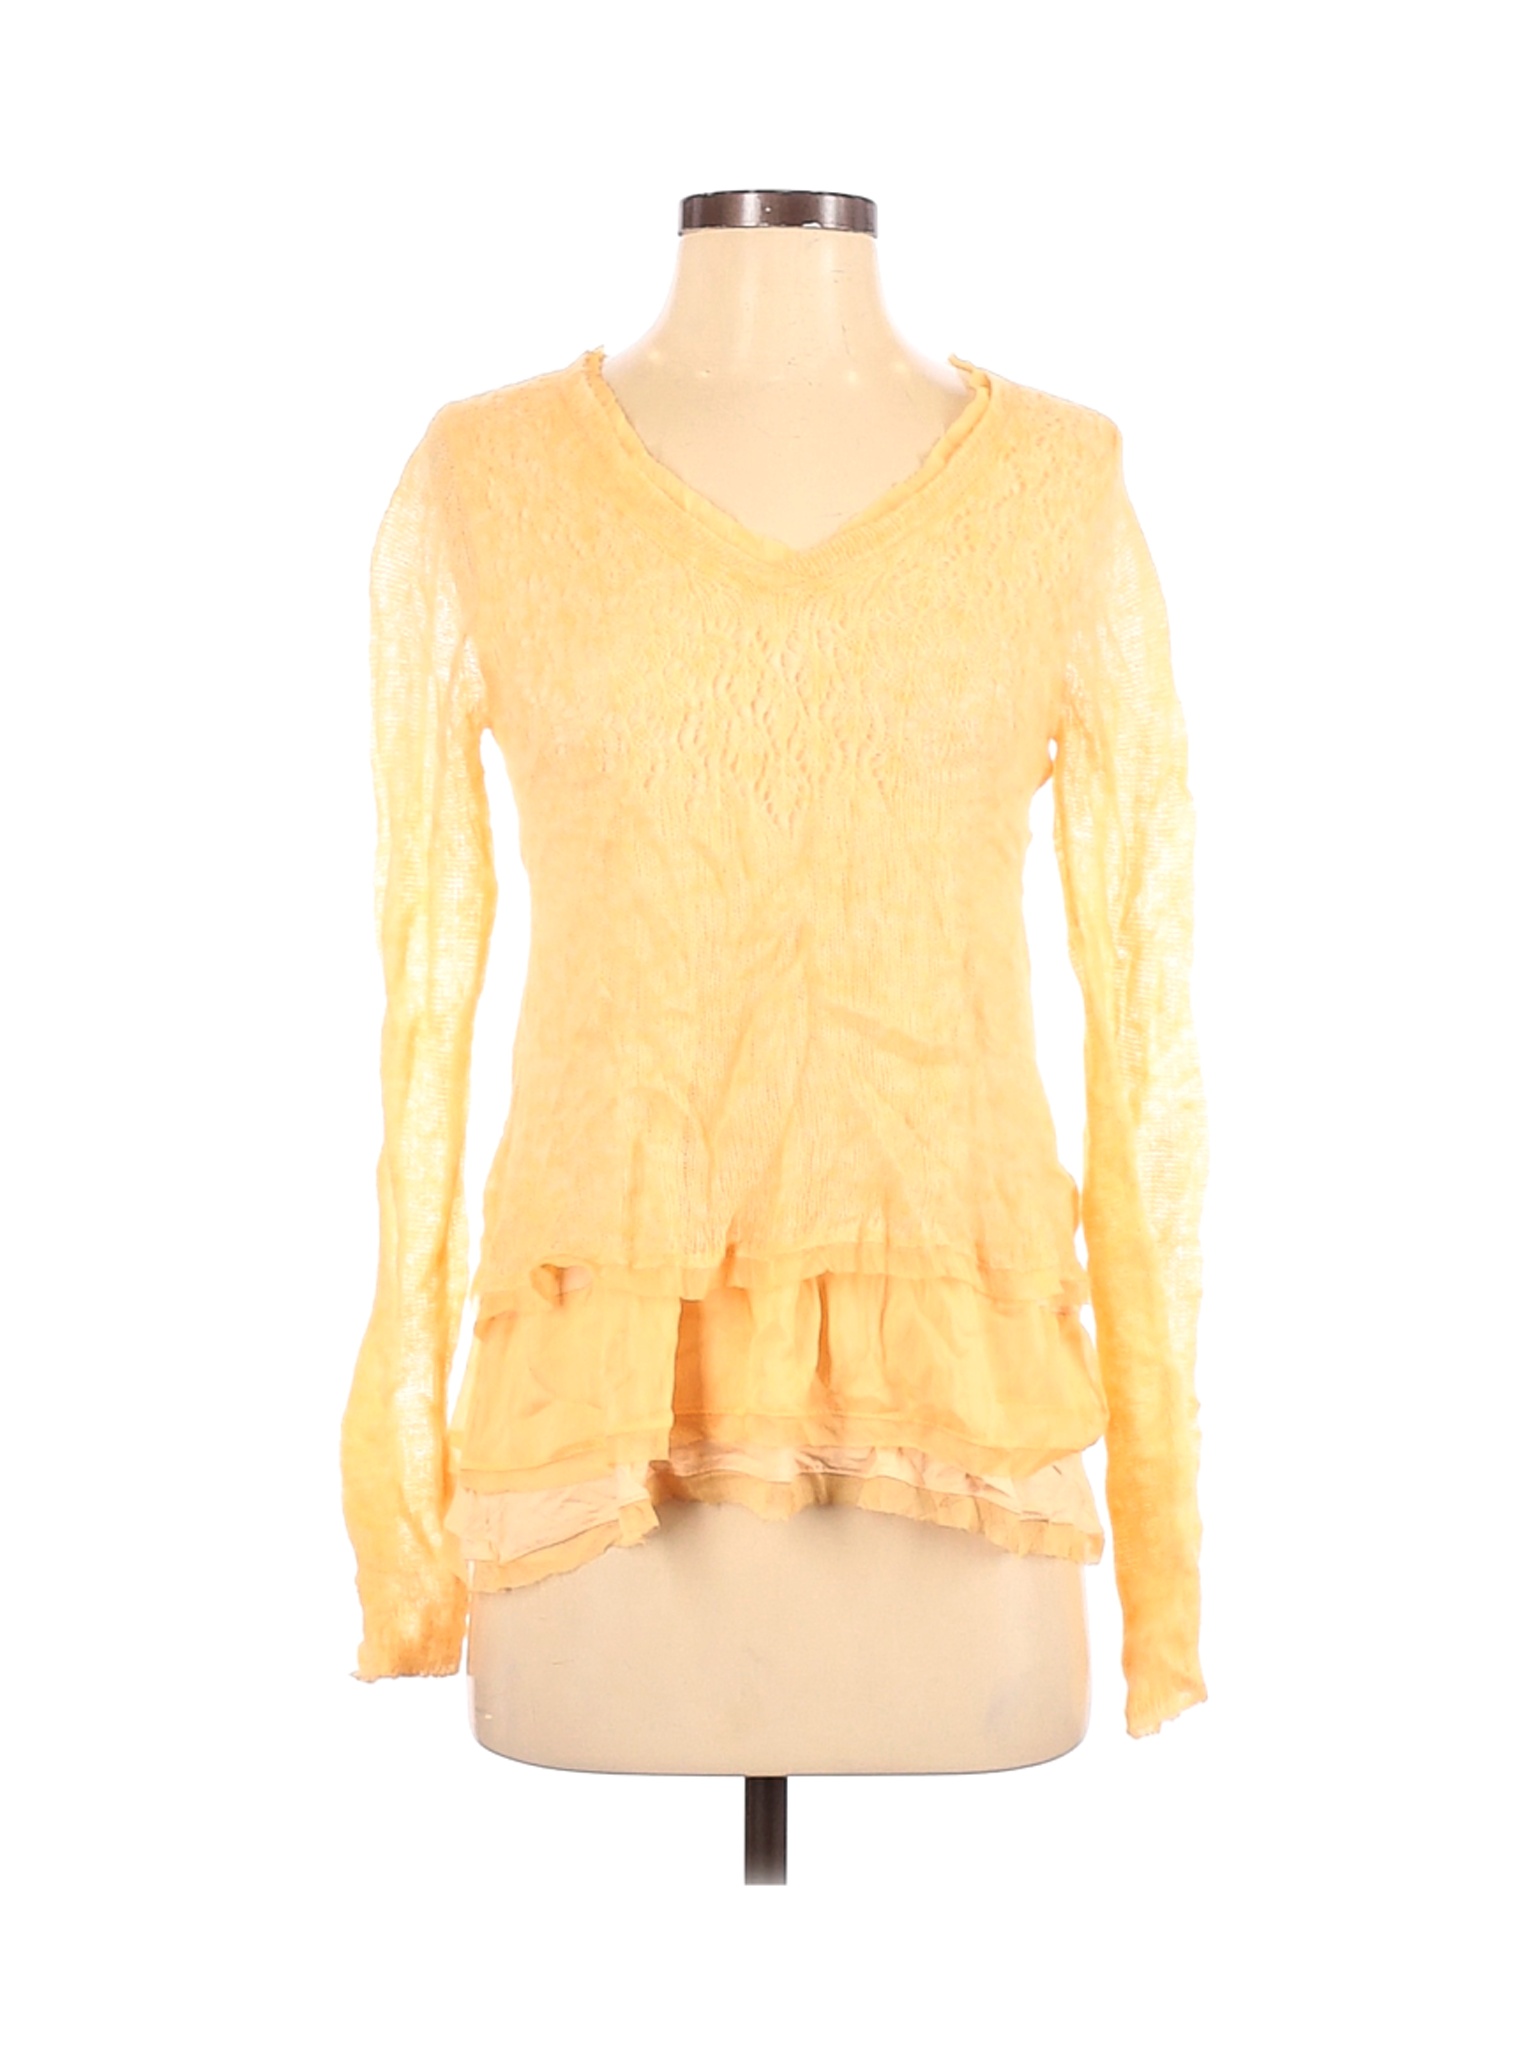 Knitted & Knotted Women Yellow Pullover Sweater S | eBay